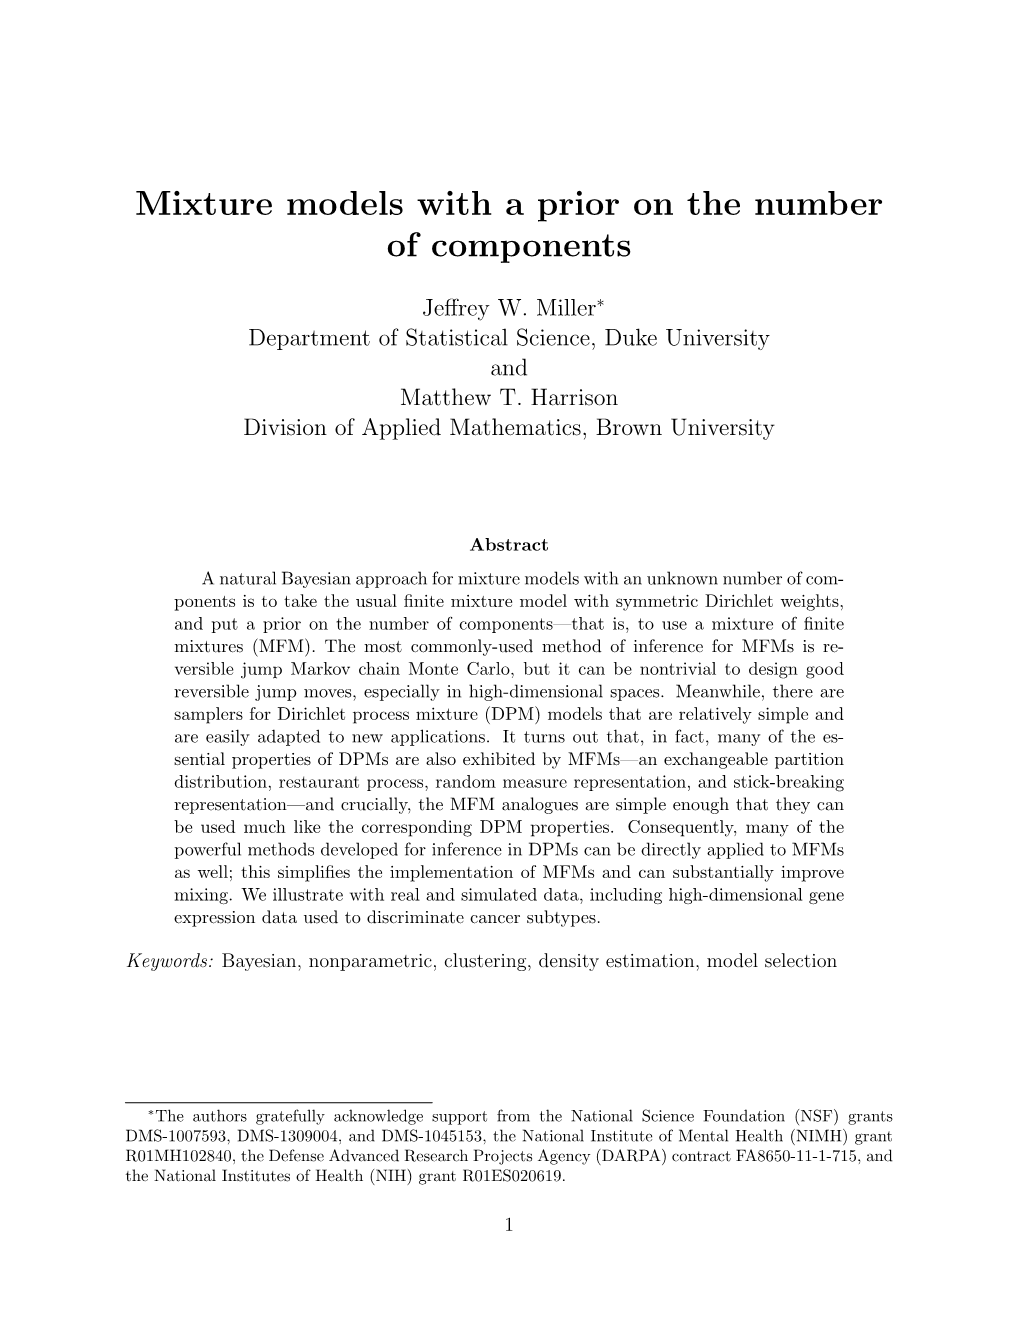 Mixture Models with a Prior on the Number of Components